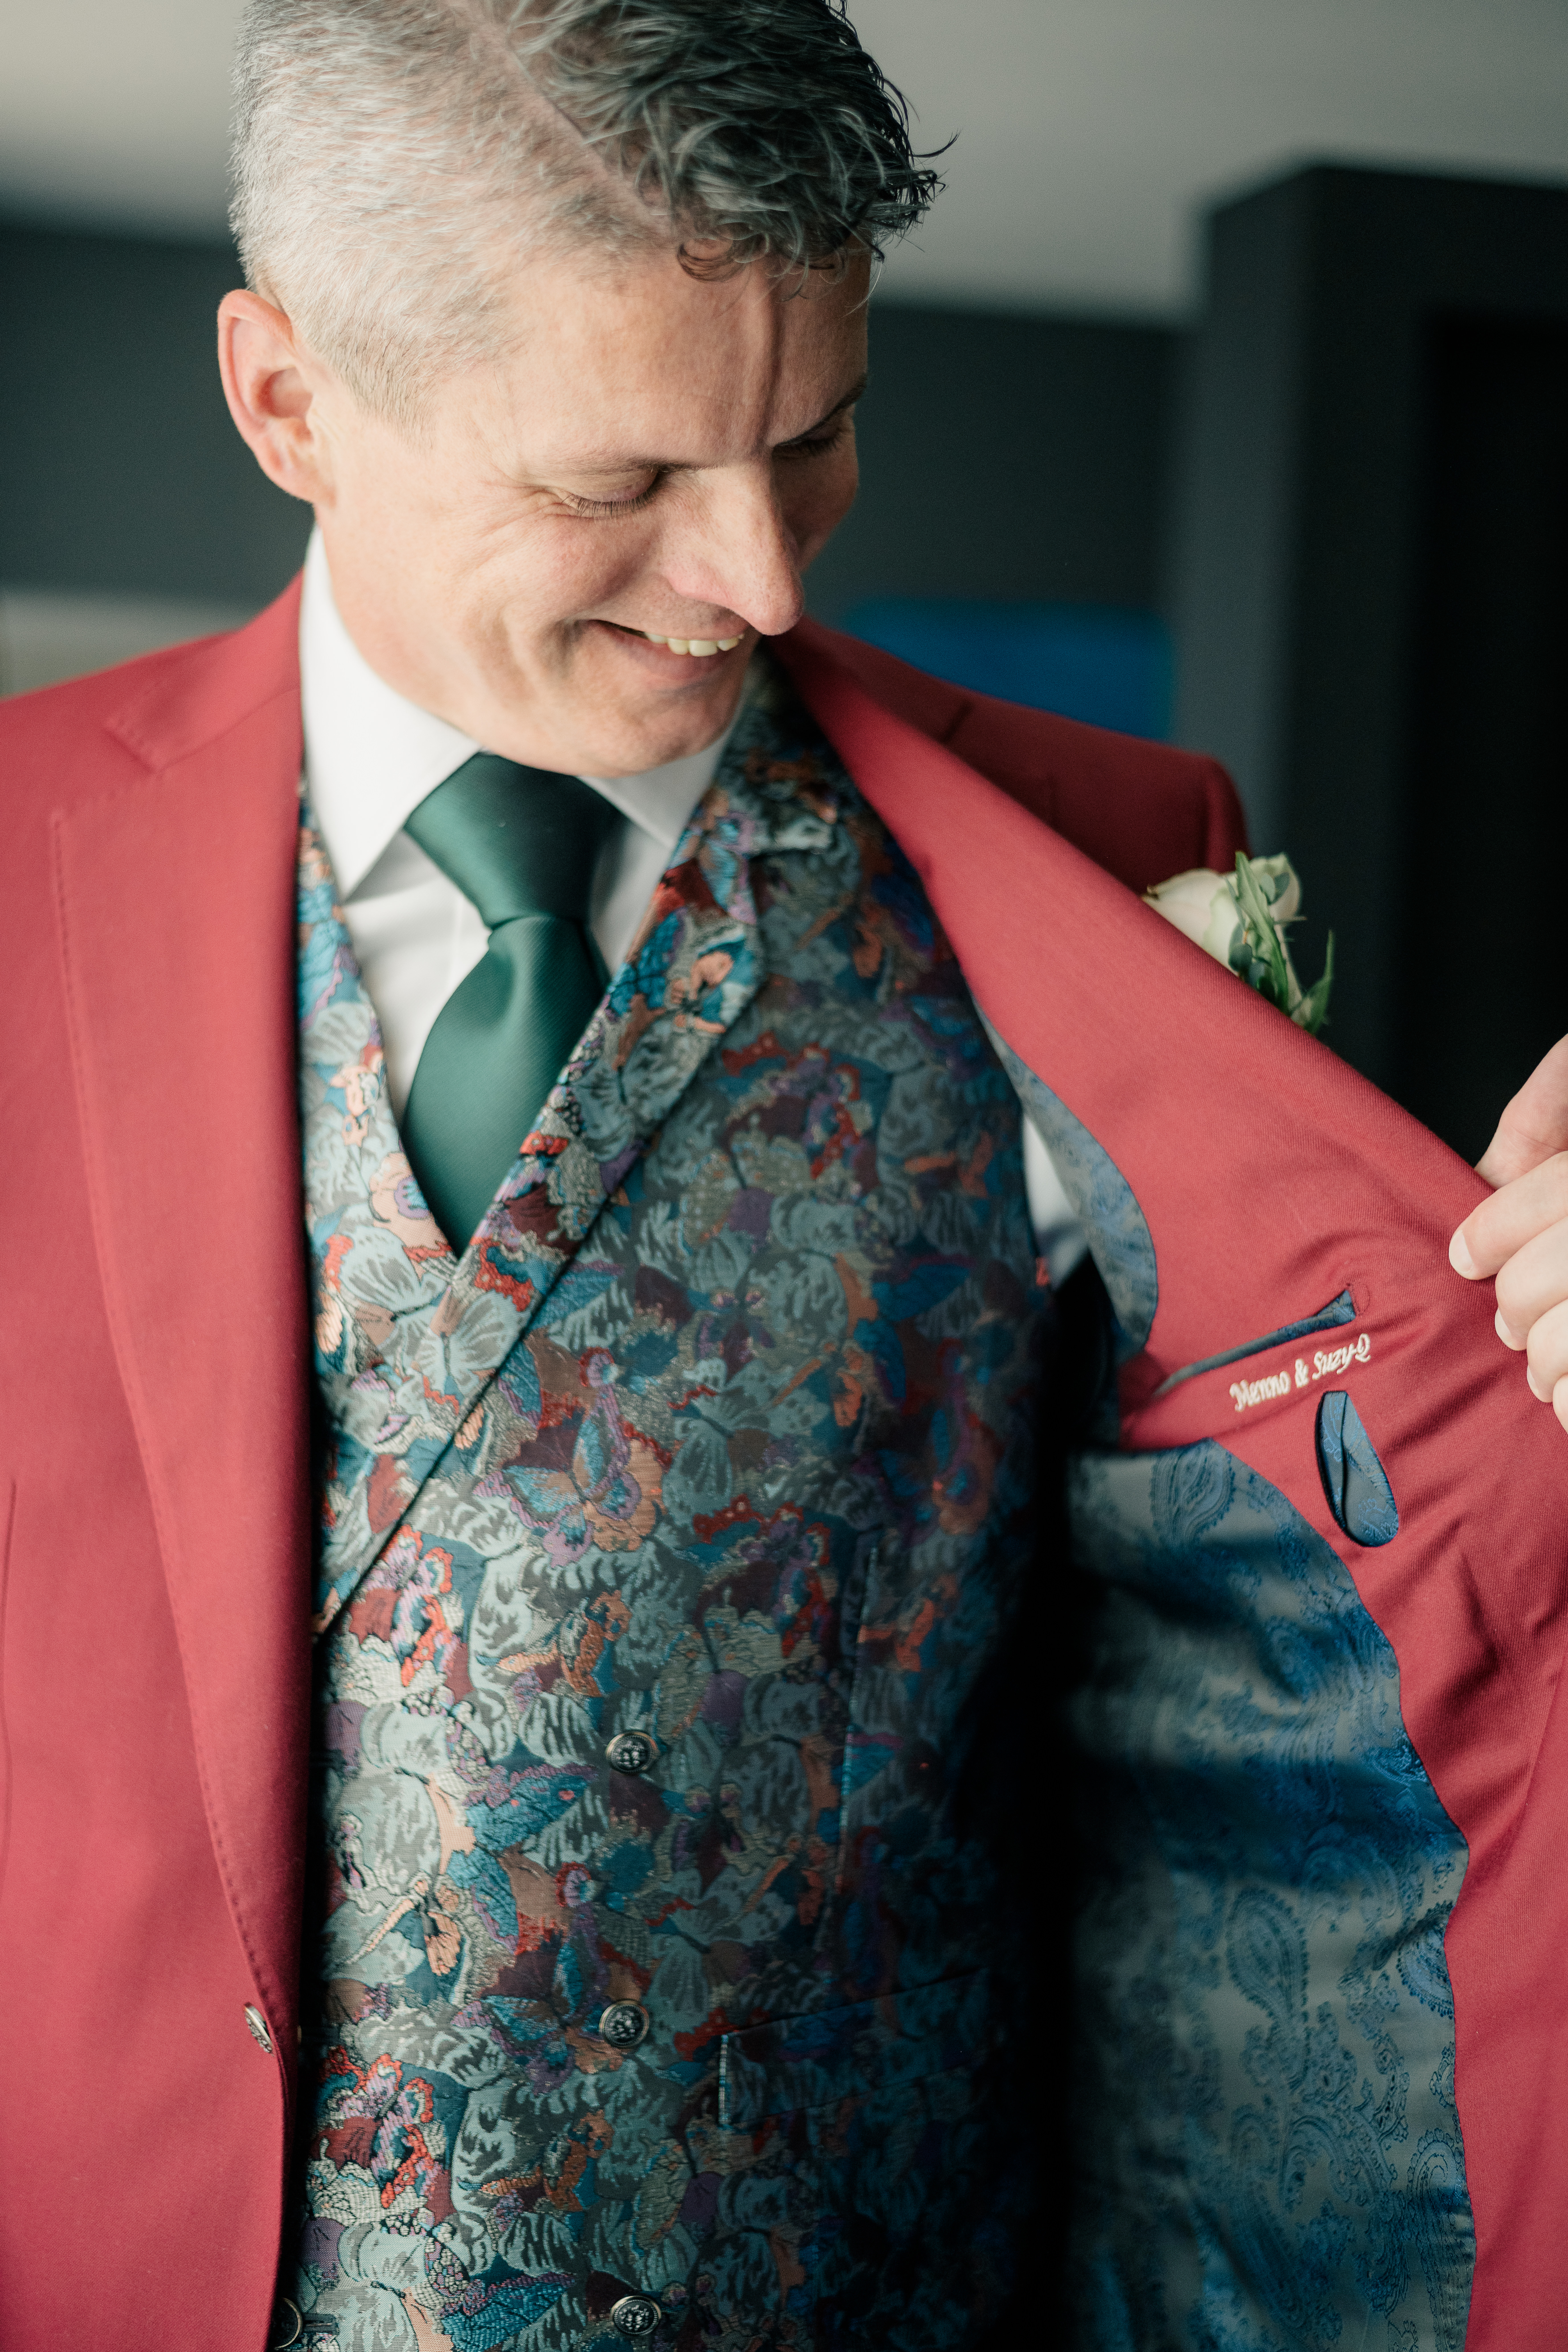 proud groom shows off his custom embroidery inside of three piece suit.